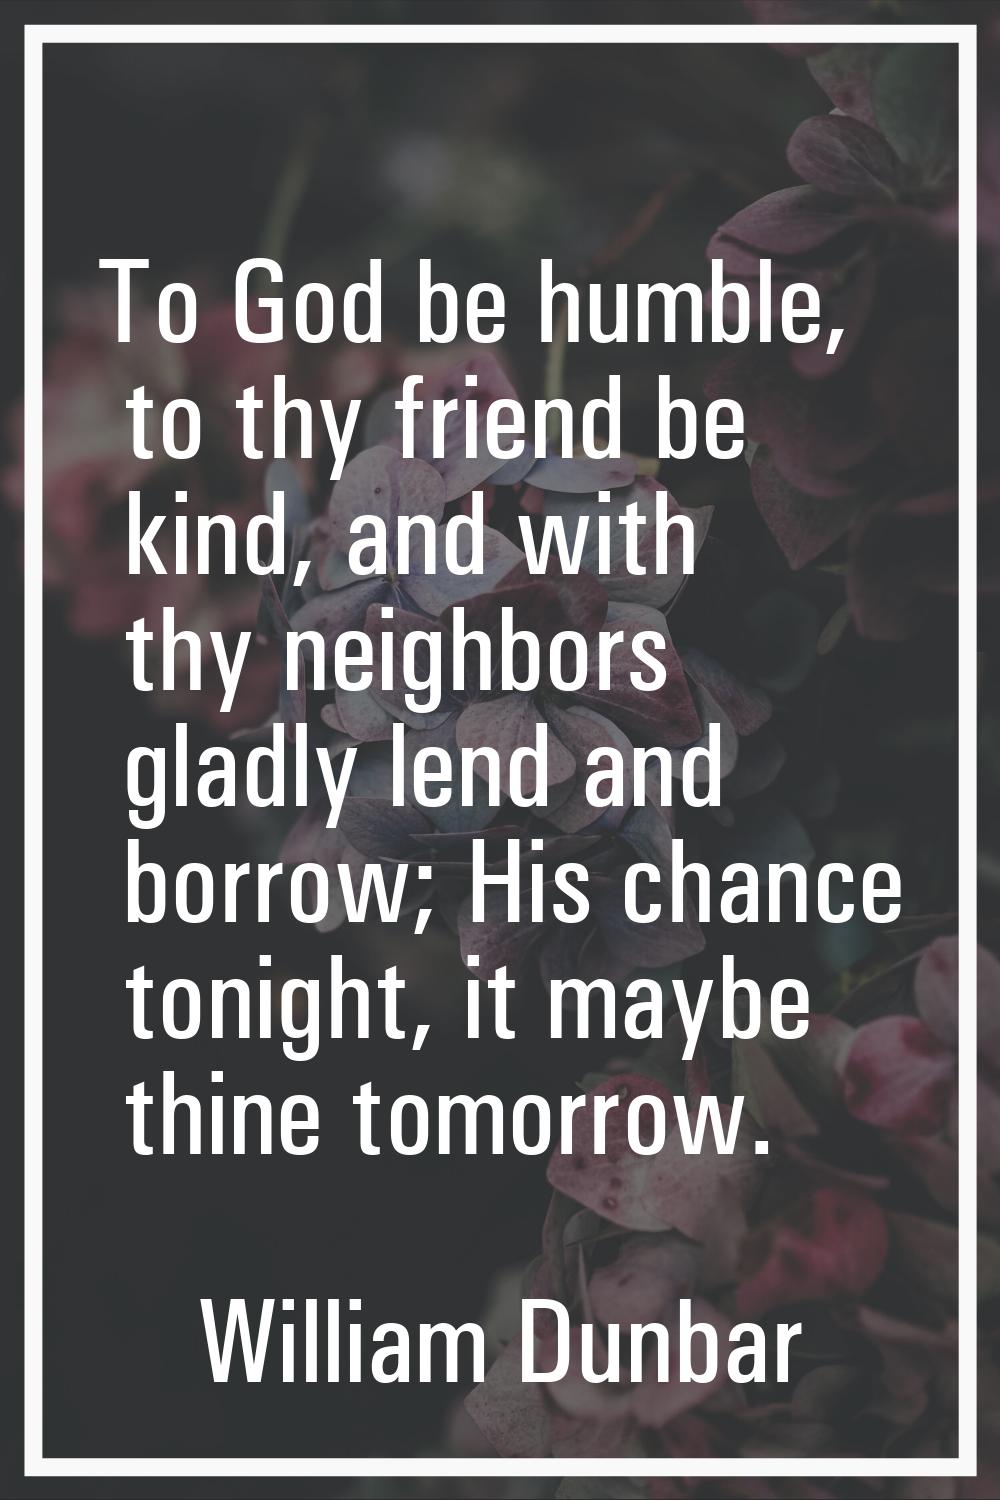 To God be humble, to thy friend be kind, and with thy neighbors gladly lend and borrow; His chance 